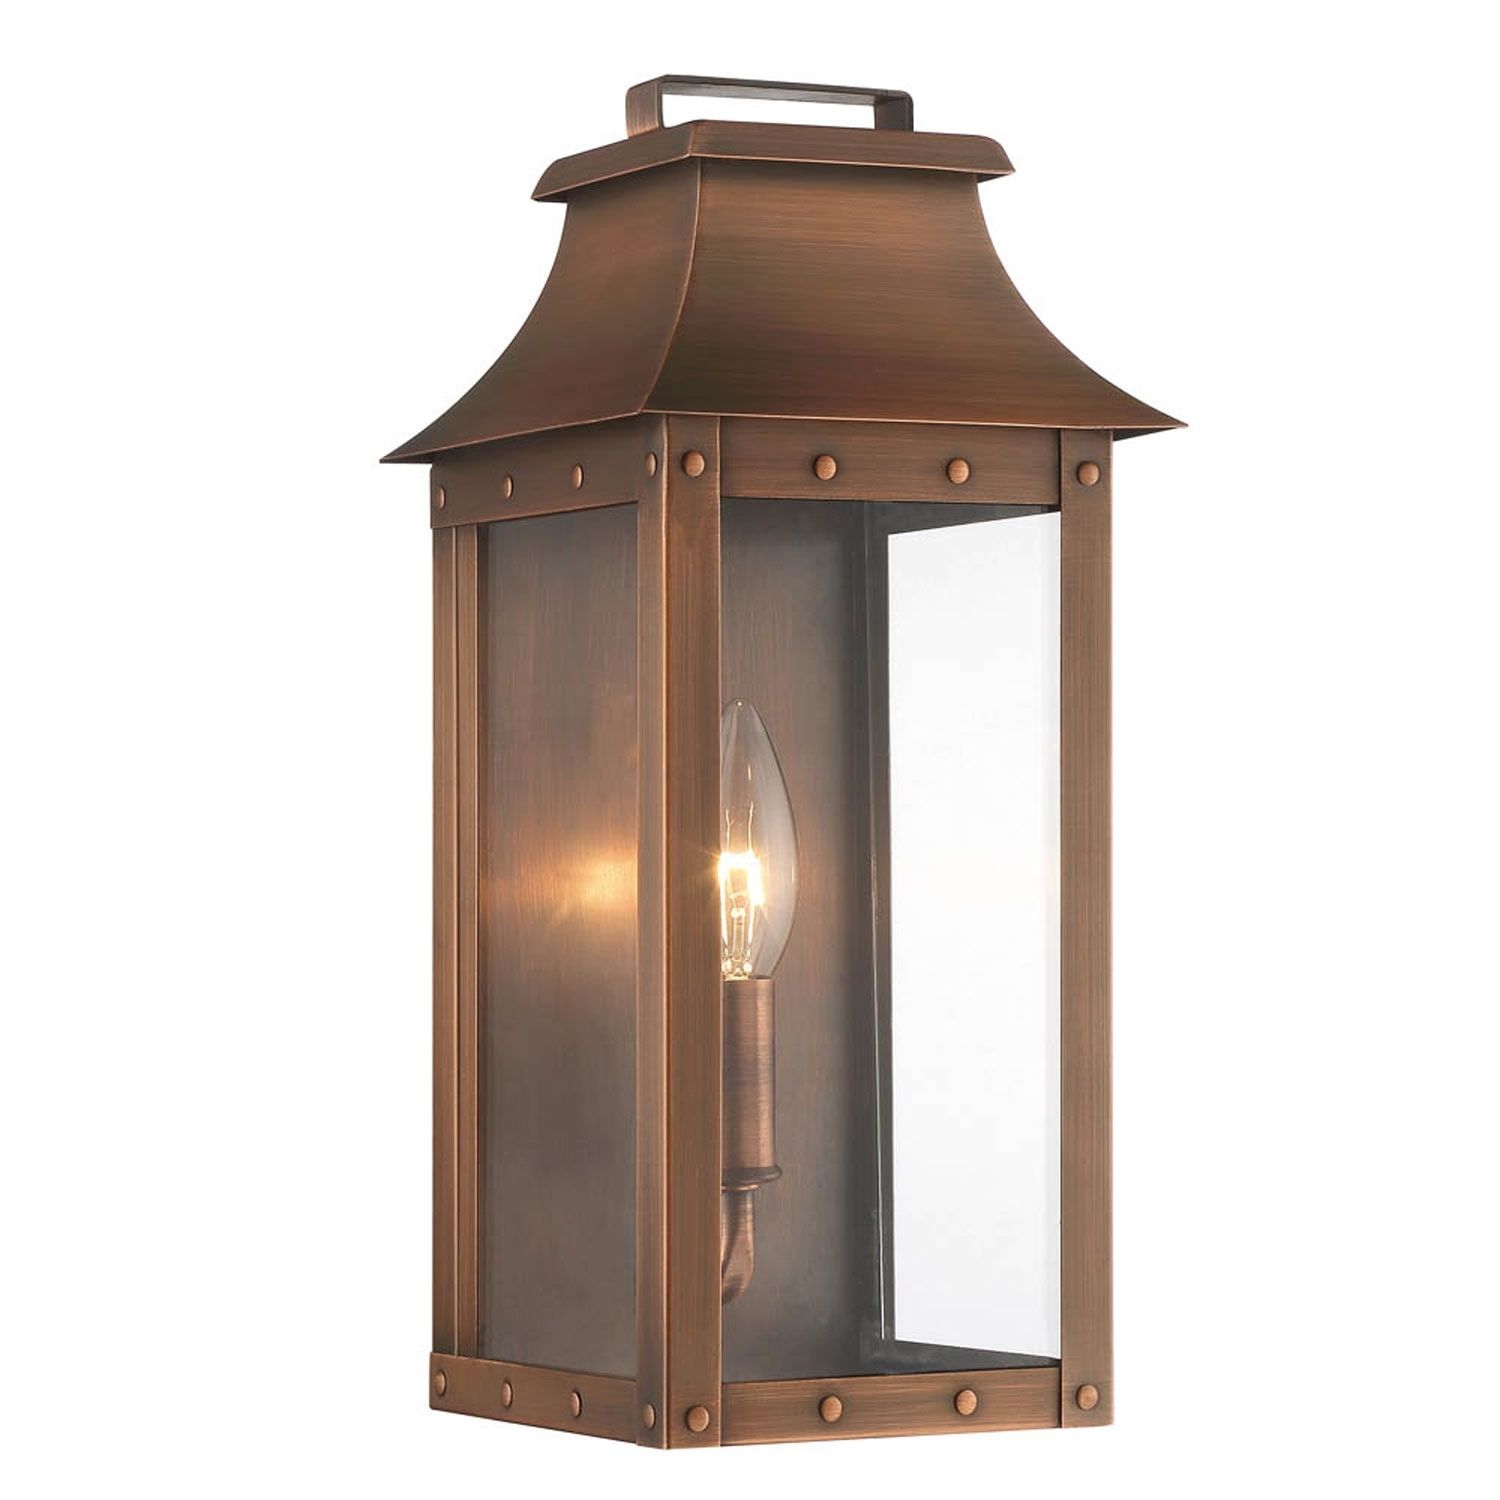 Manchester Copper Patina One Light Outdoor Wall Mount Acclaim Intended For Acclaim Lighting Outdoor Wall Lights (View 10 of 15)